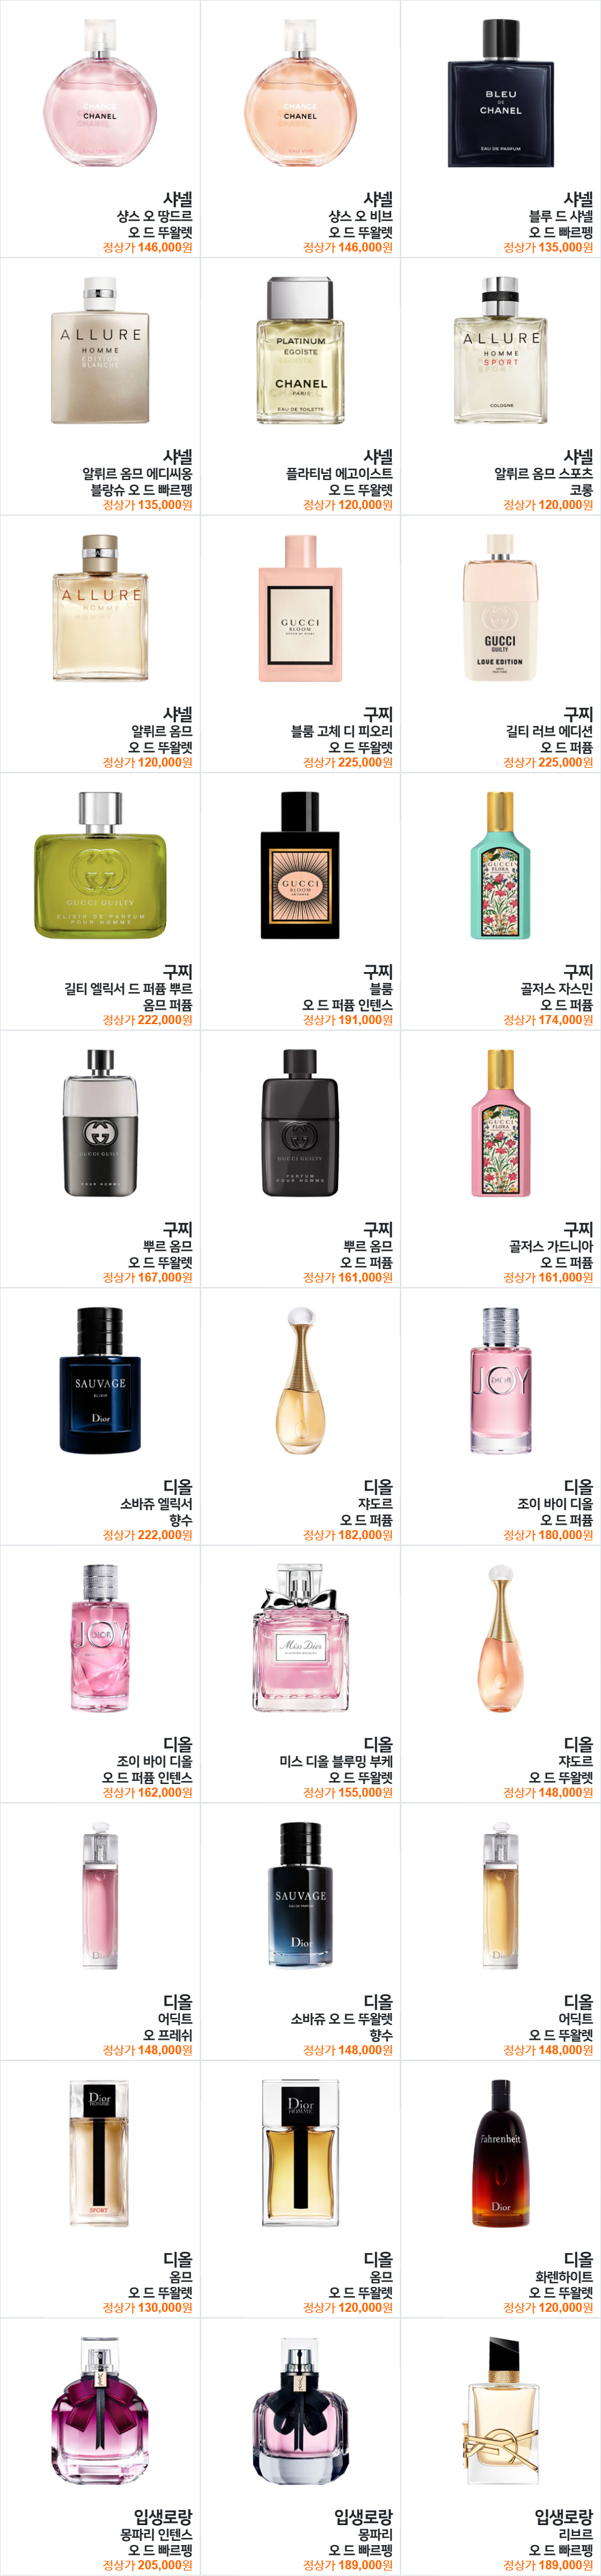 perfumeproduct2.png